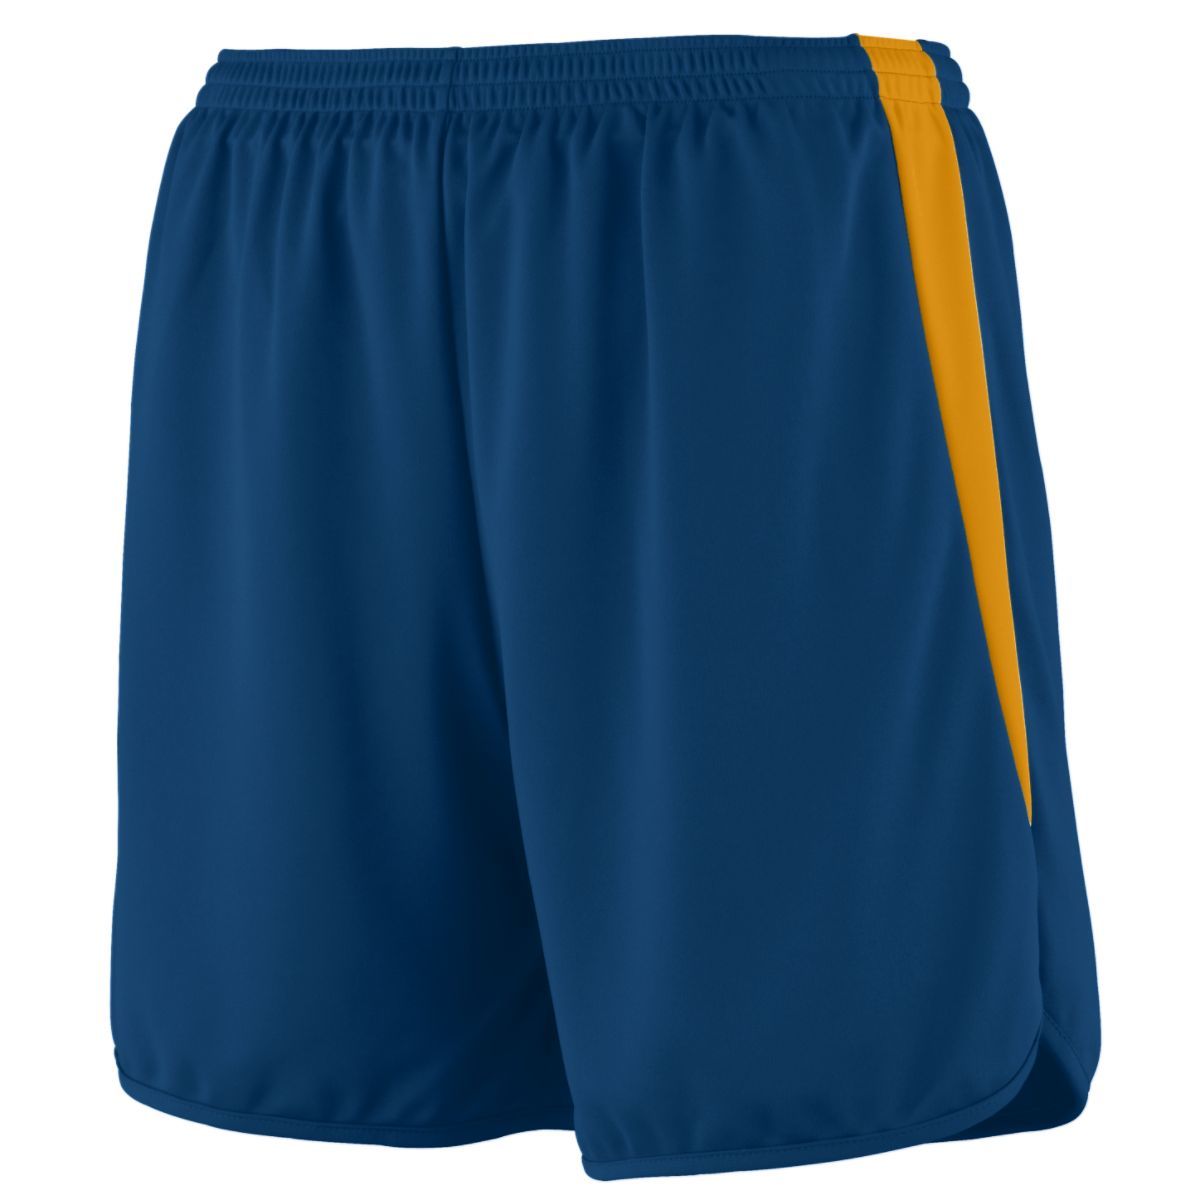 Augusta Sportswear Rapidpace Track Shorts in Navy/Gold  -Part of the Adult, Adult-Shorts, Augusta-Products, Track-Field product lines at KanaleyCreations.com